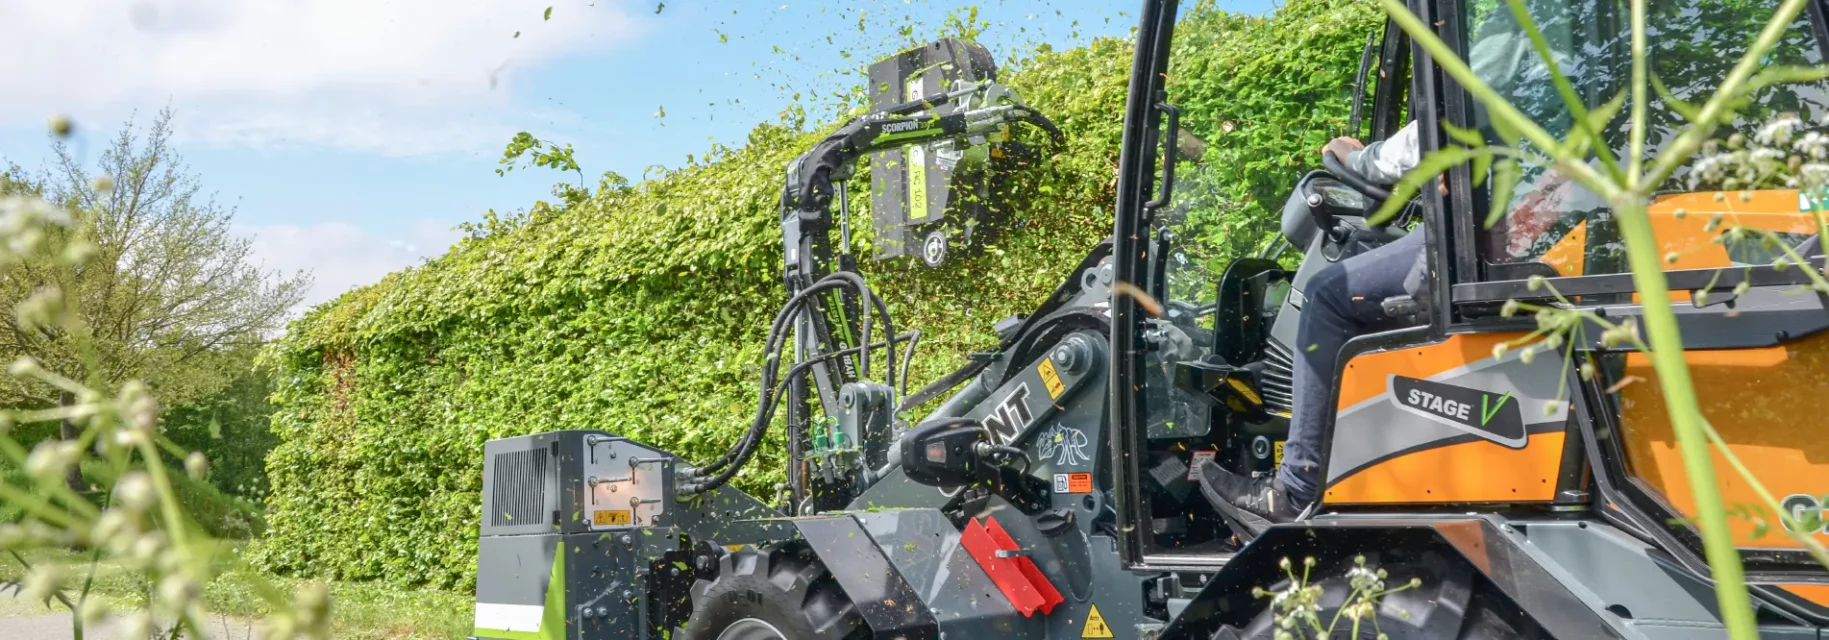 Professional hedge trimming with Giant skid steer